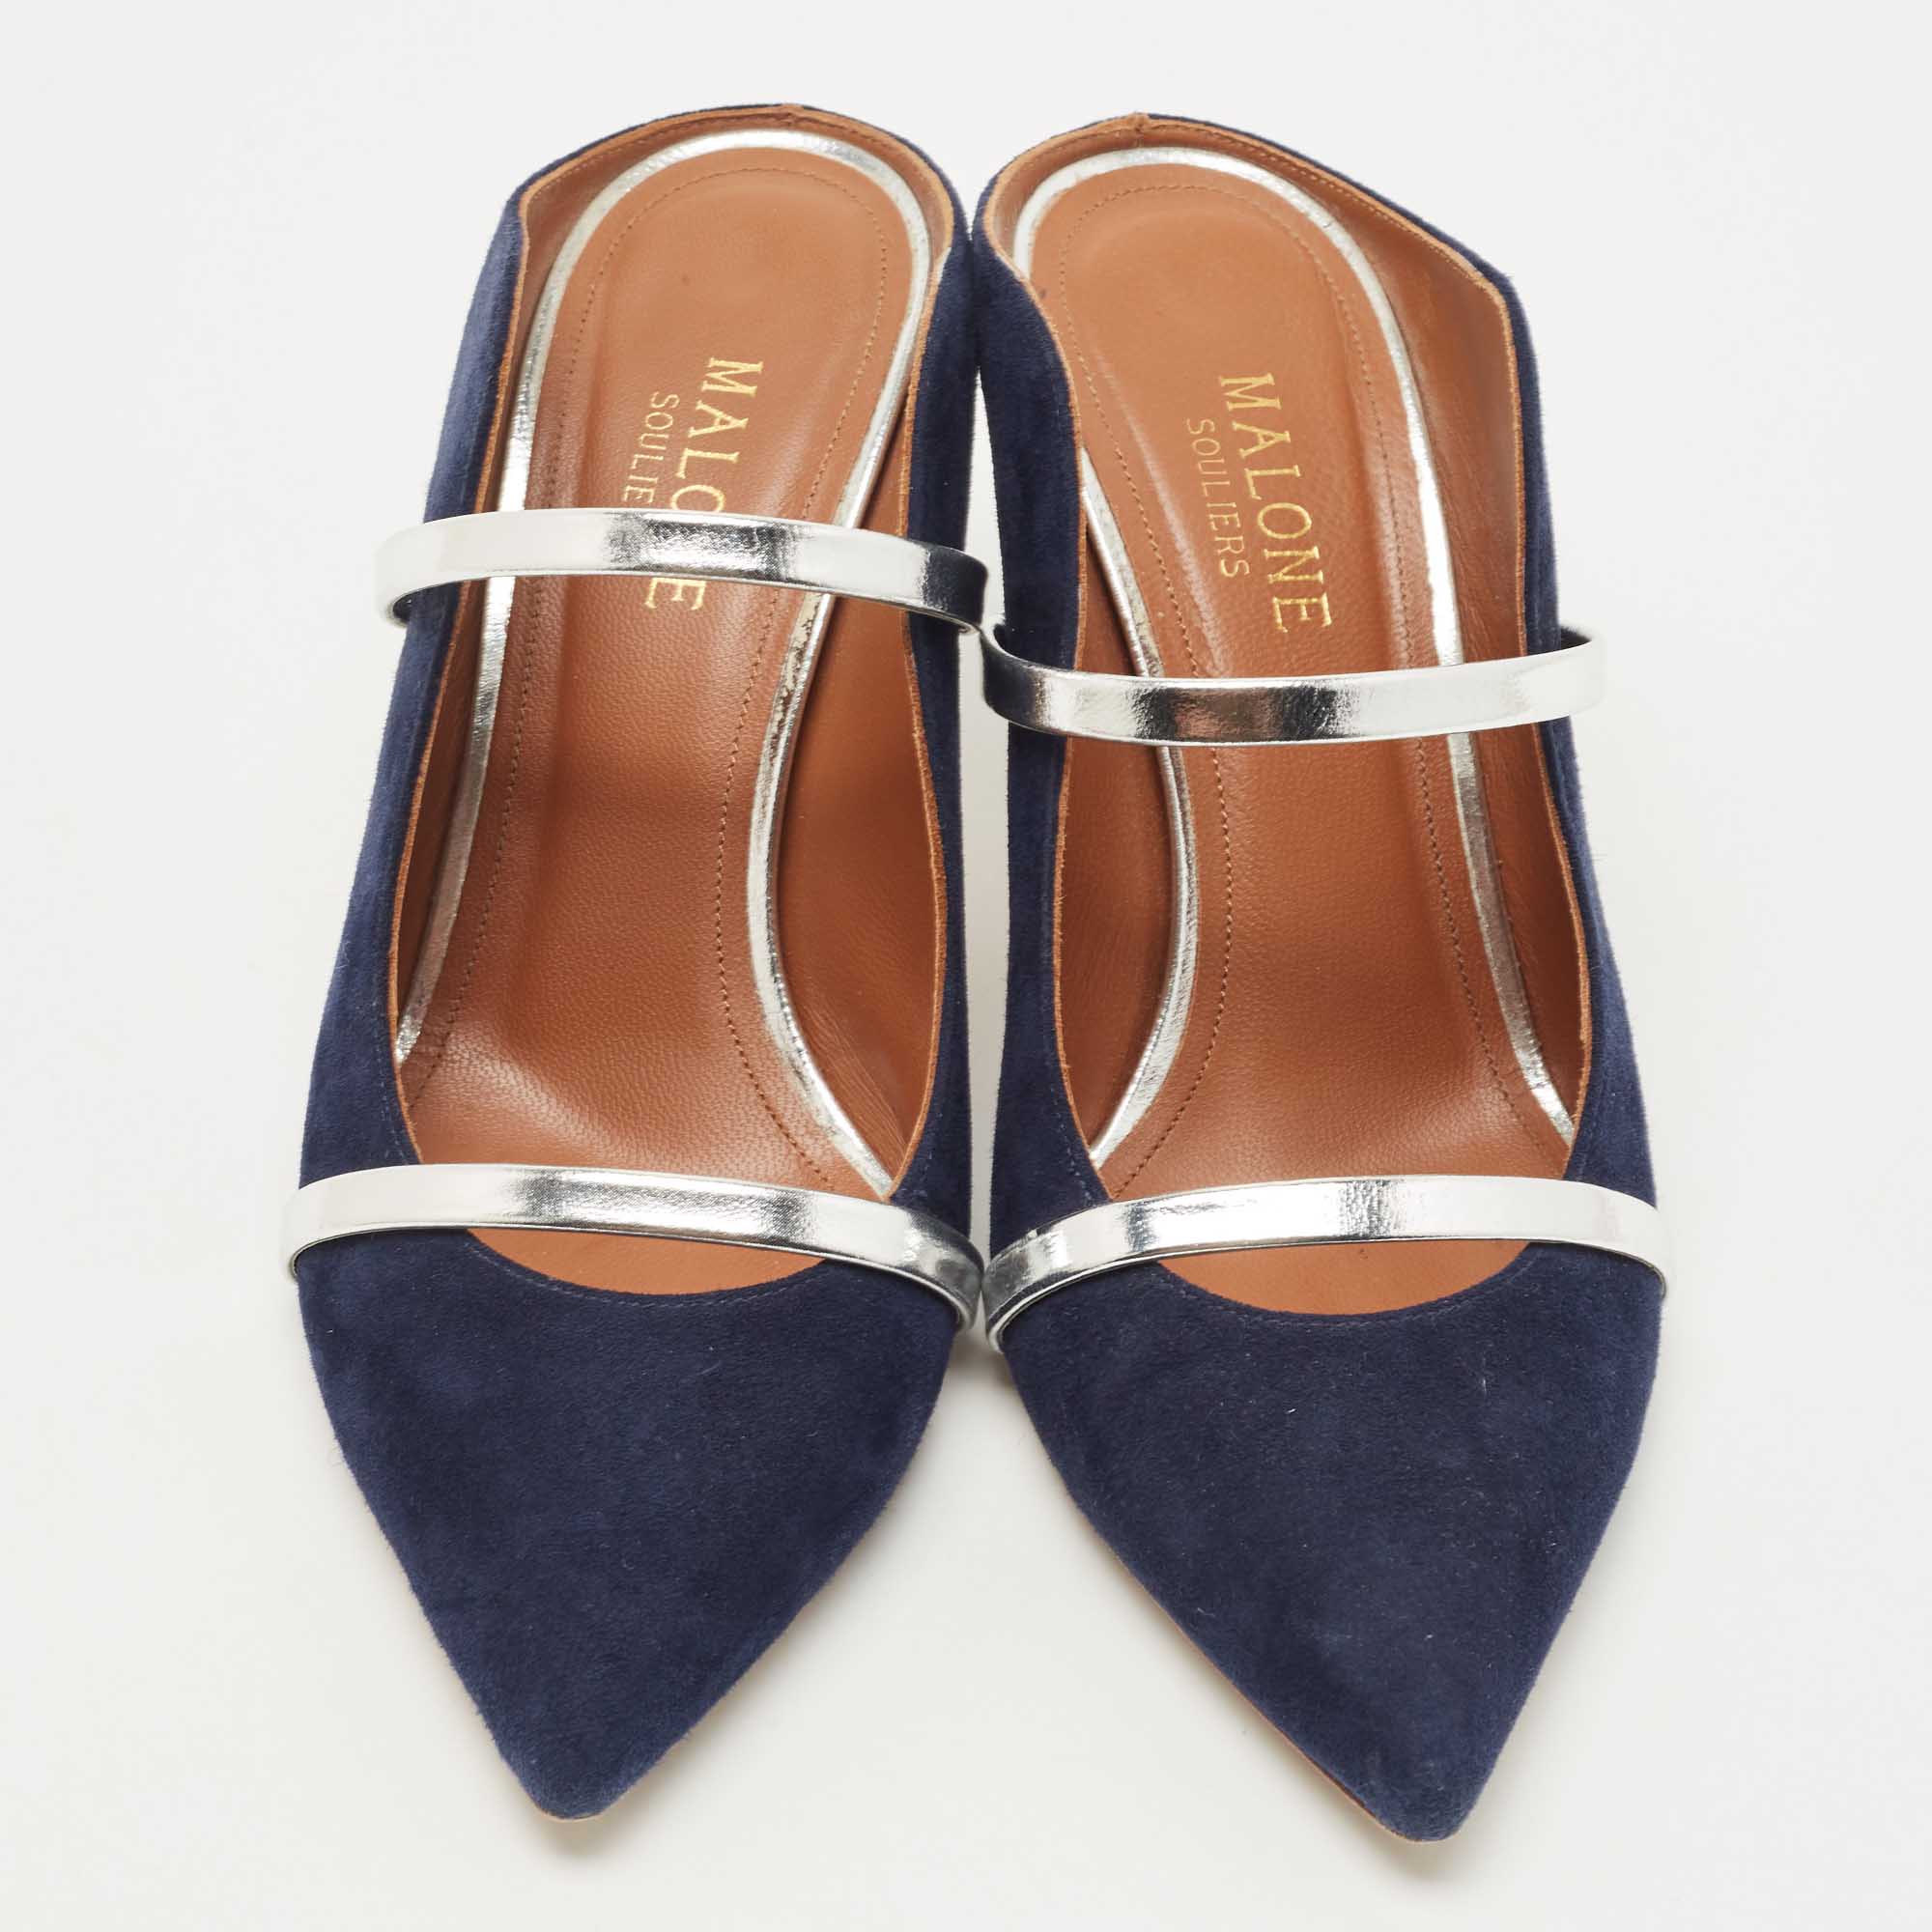 Malone Souliers Navy Blue Leather Maureen Pumps Size 37.5